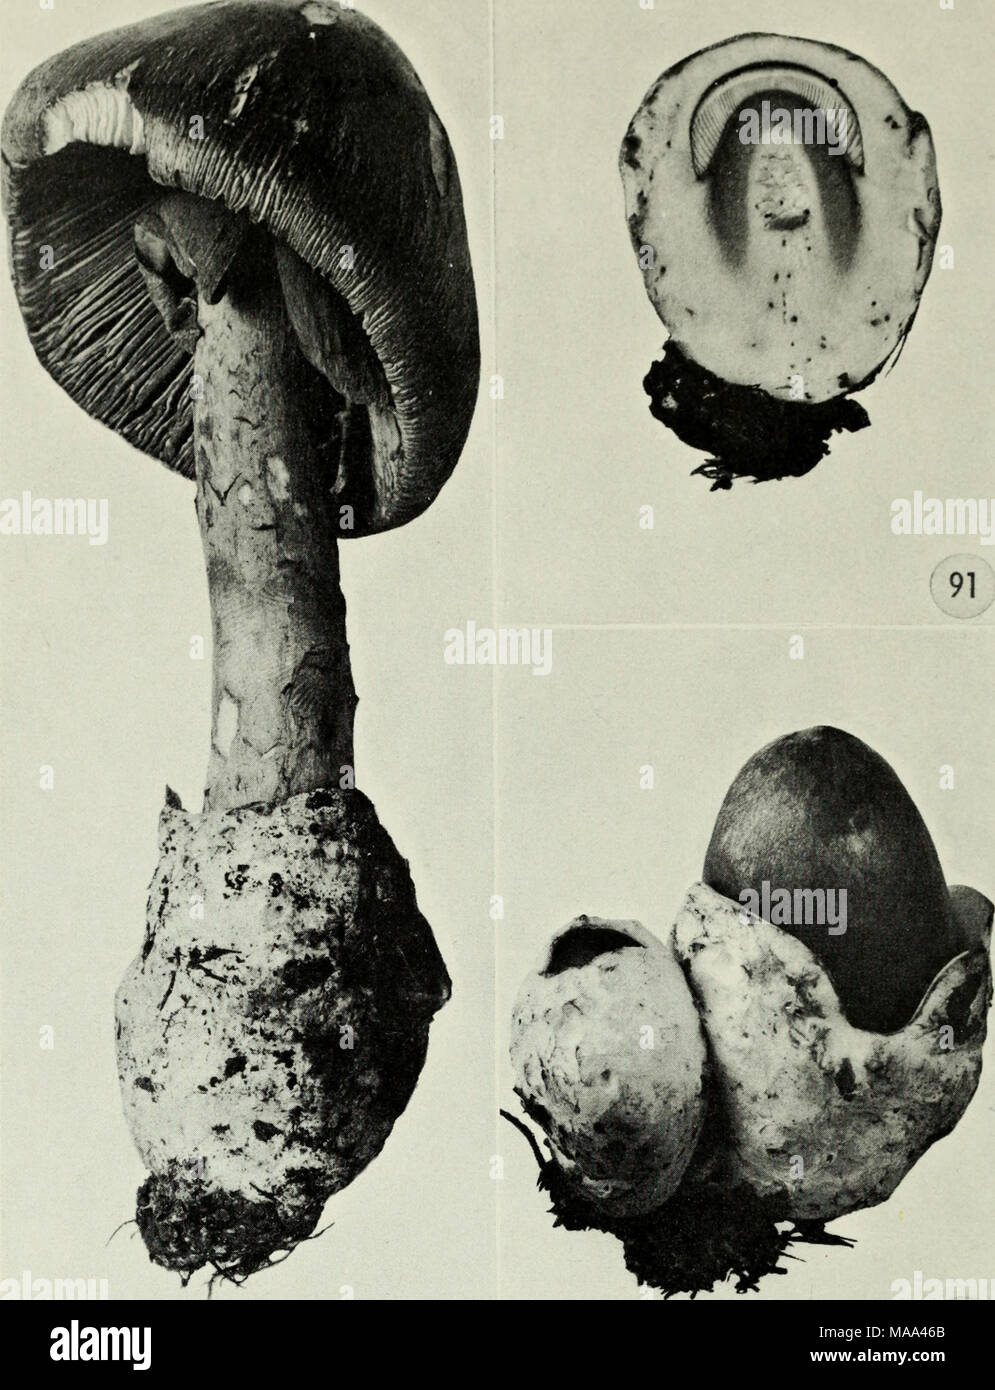 . Edible and poisonous mushrooms of Canada . I I 90 V 92 Figures 90-92, Amanita caesarea. 90, mature plant, note loose membranous volva; 91, section of young plant before volva has ruptured showing outline of young fruiting body within the volva; 92, young plants showing ruptured volva with young fruiting body emerging. 93. Russula densifolia. 95. R. emetica. 97. R.jallax. 99. R. joetens. 101. R. lutea. Figures 93-102 94. R. densifolia. 96. R. emetica. 98. R.flava. 100. R.fragilis. 102. R. nigricans. 48 Stock Photo